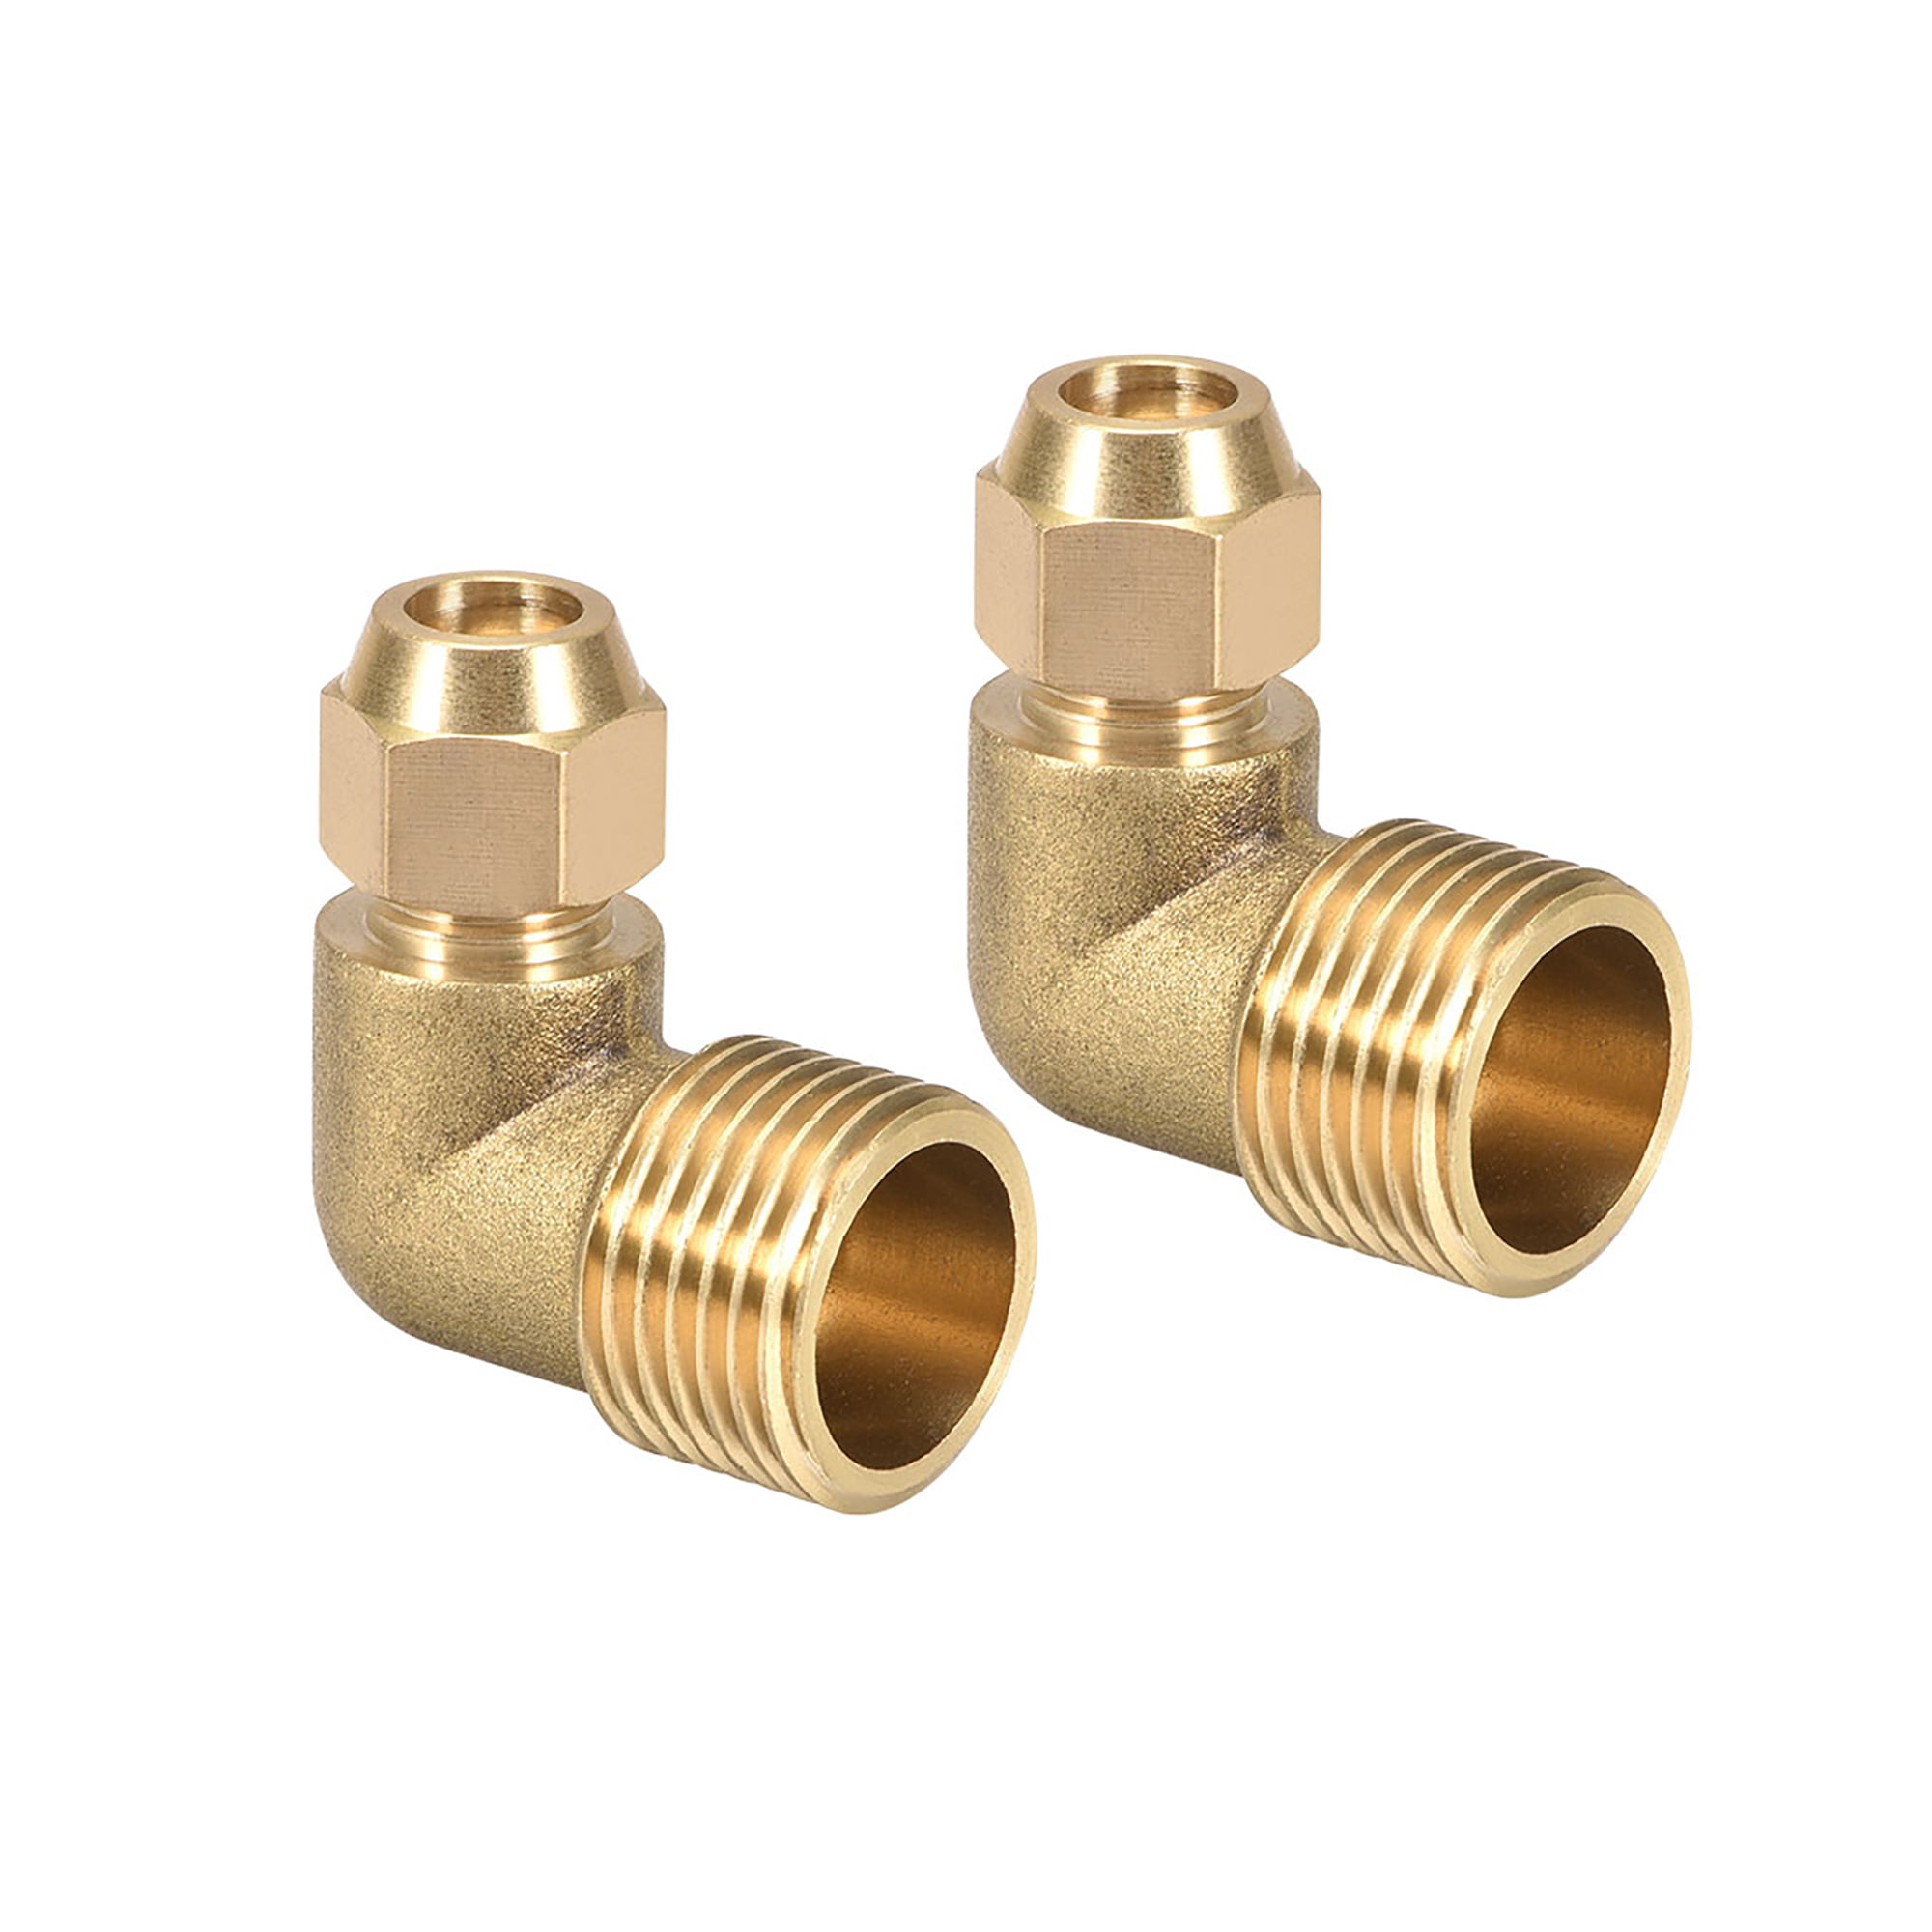 8mm Compression ElbowBrass Plumbing Fitting For Copper Pipe